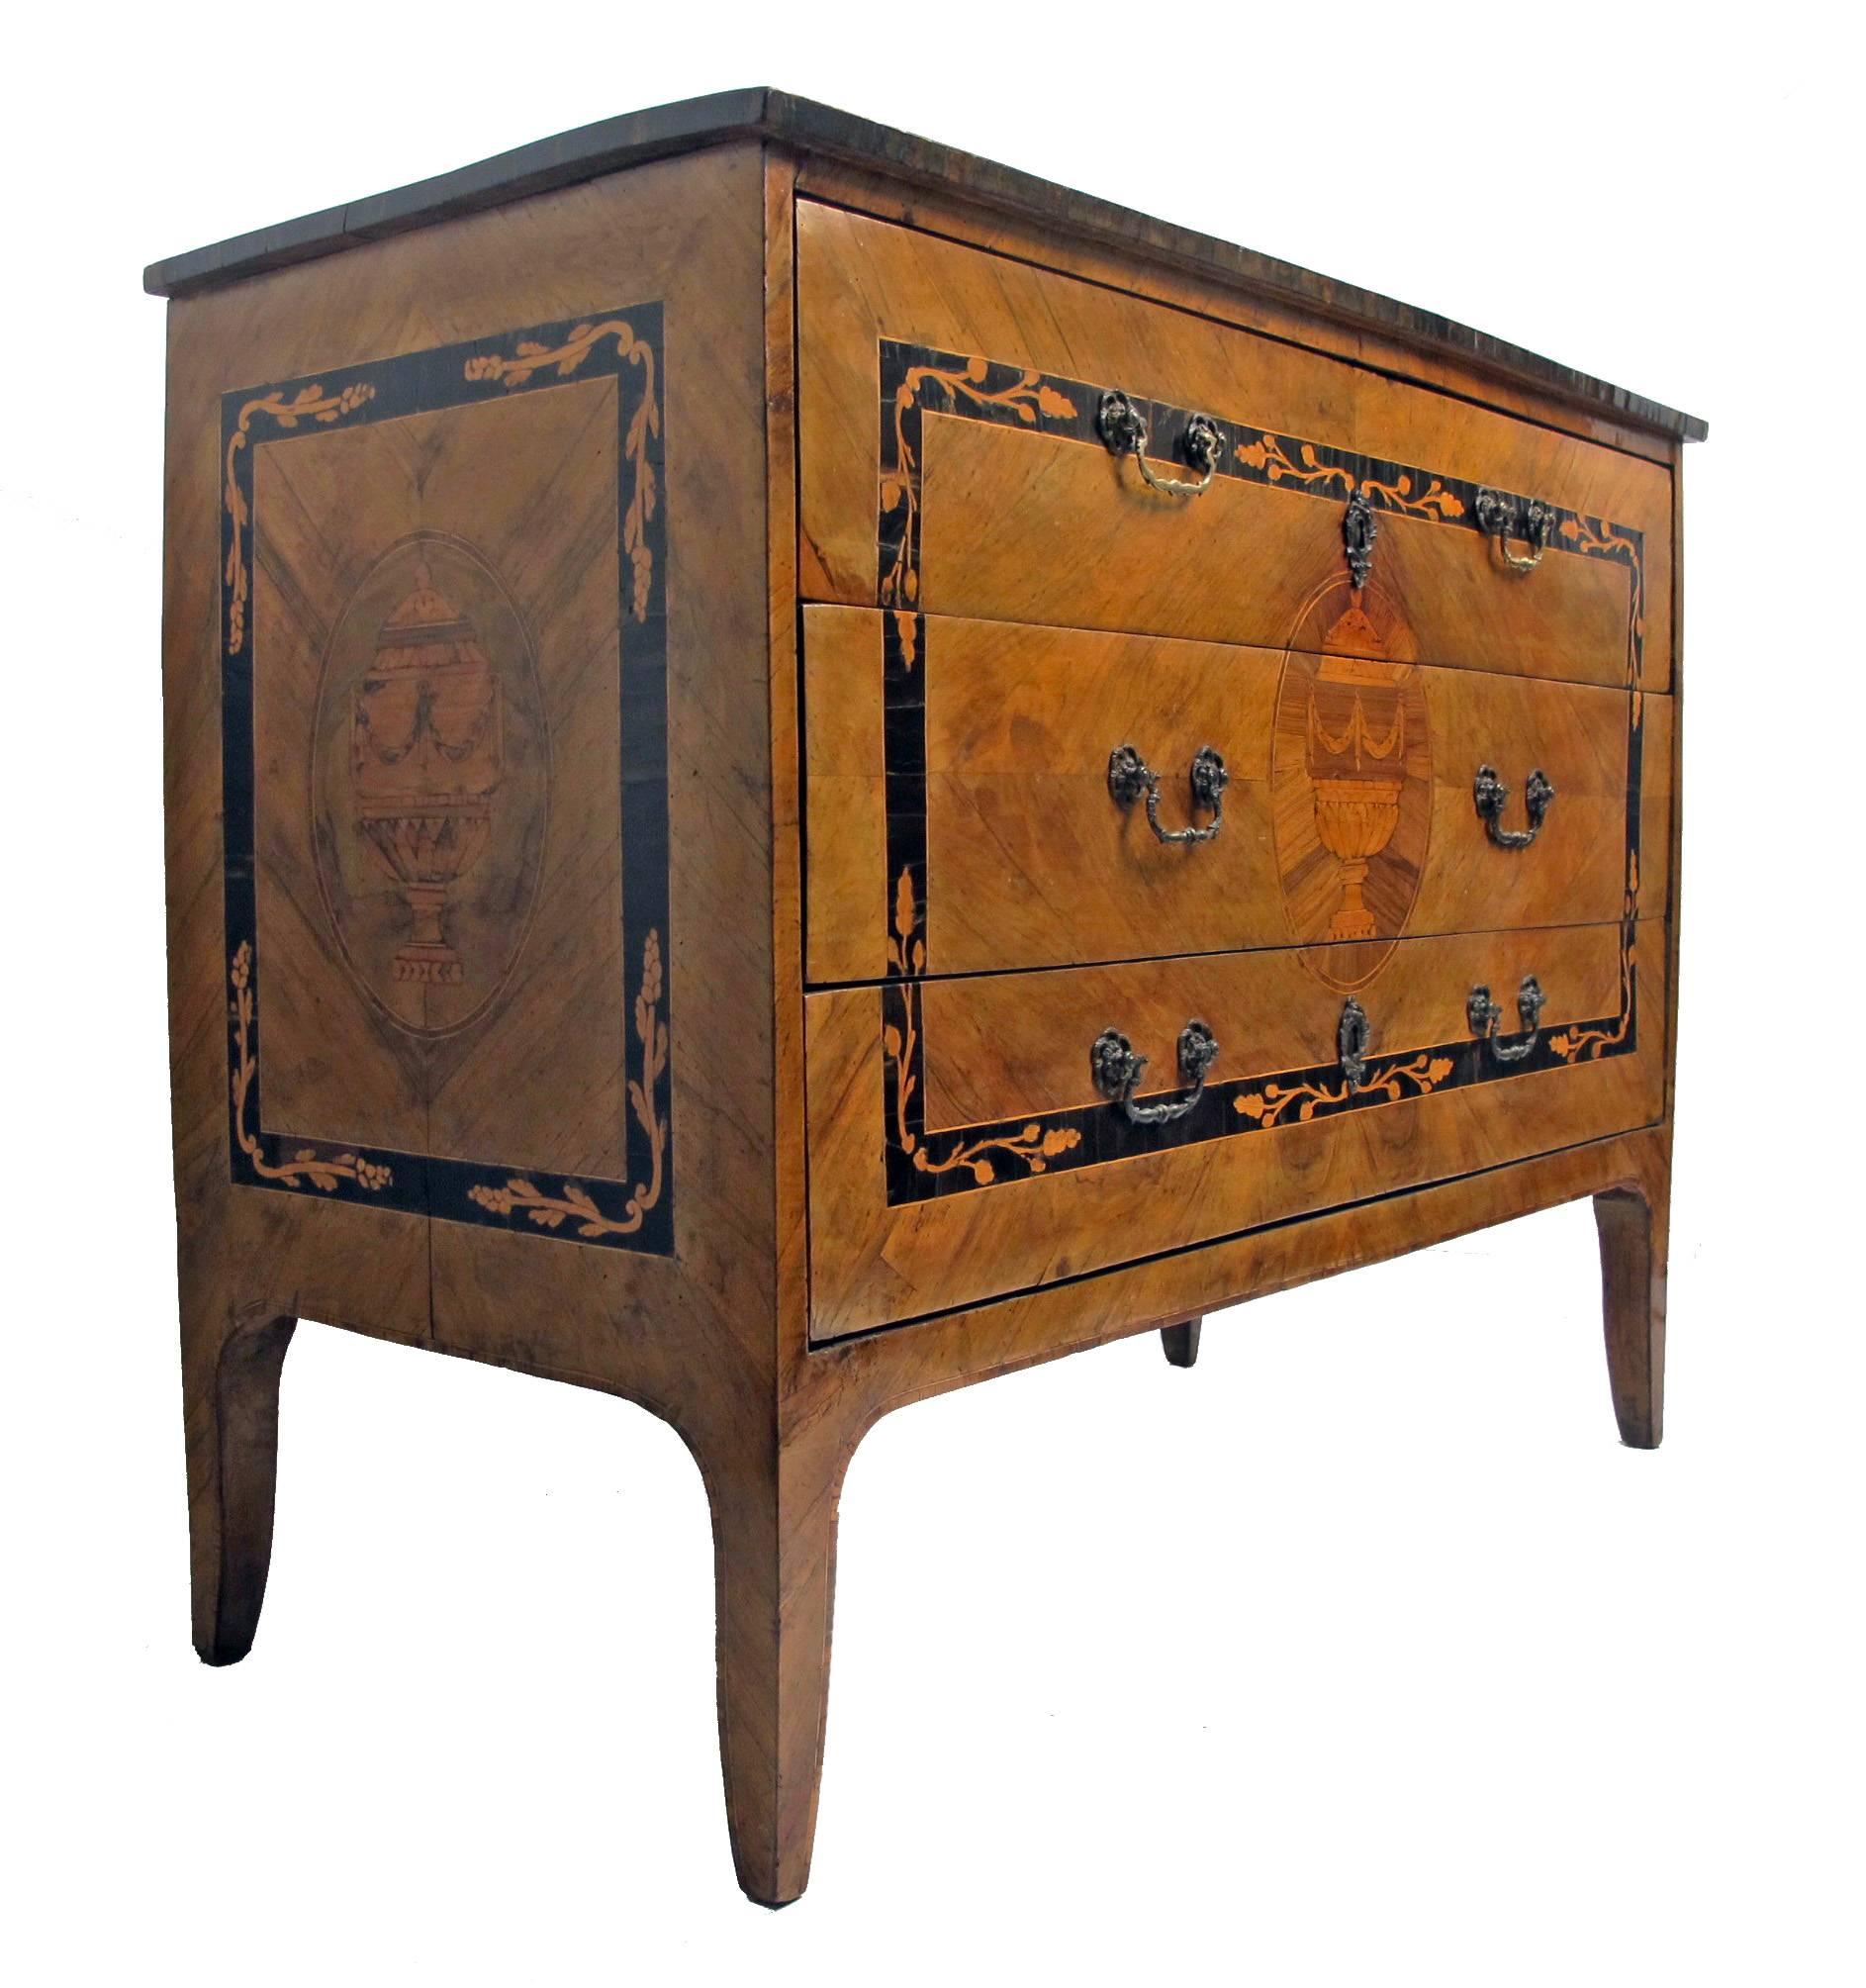 Three drawer walnut commode embellished with exquisite inlaid marquetry design of neoclassical motifs. In remarkable original antique condition with beautiful patina (pulls have been replaced), Italy, 18th century.
